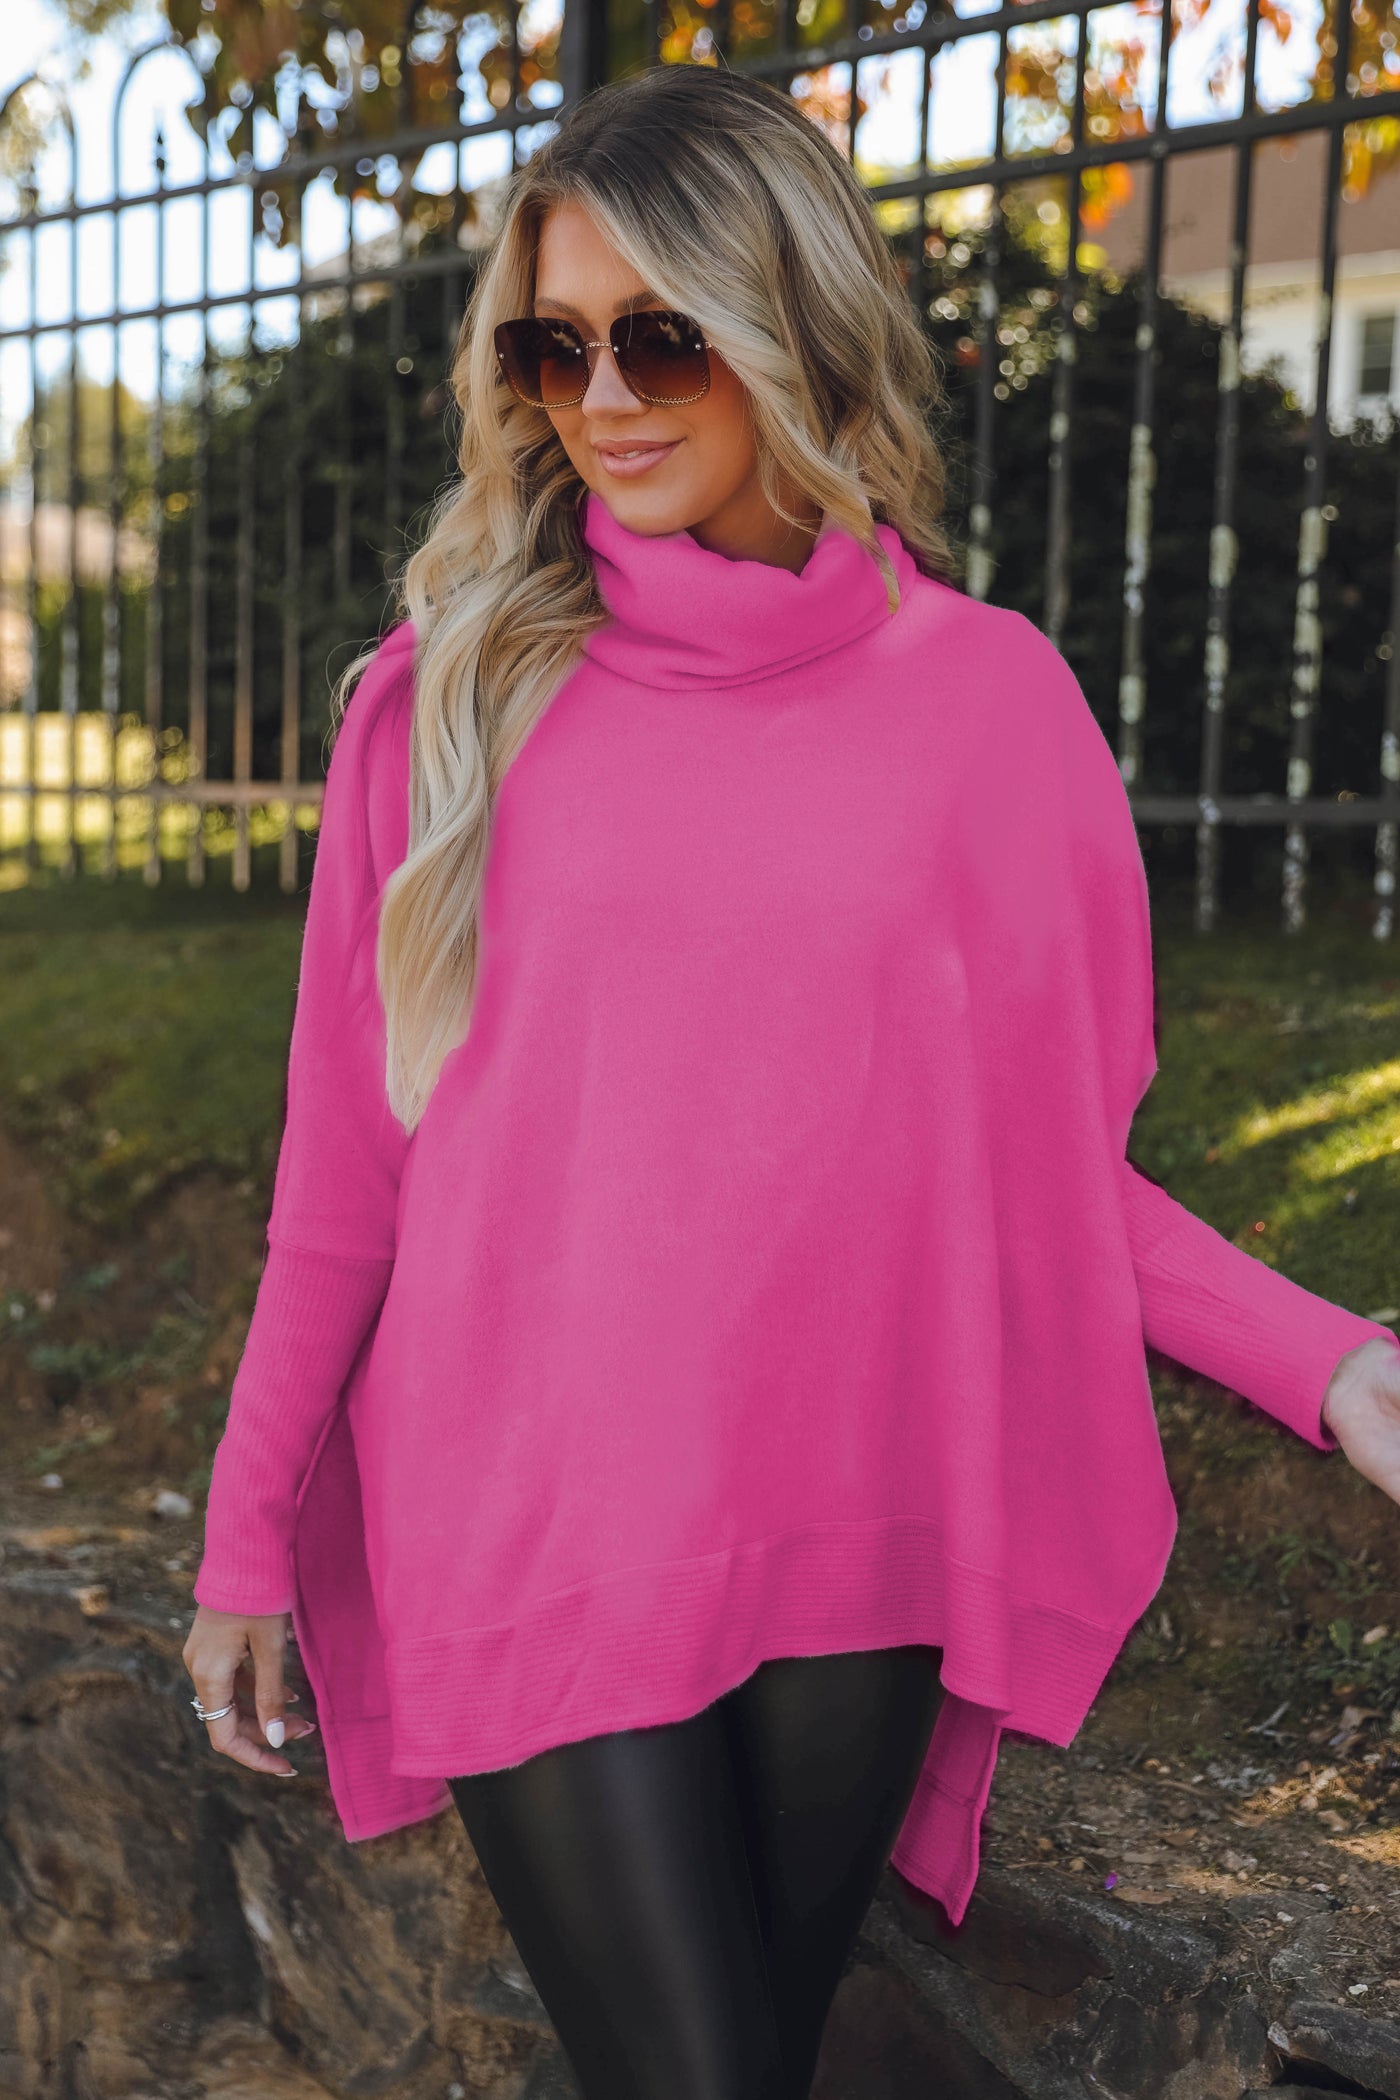 Comfy Hot Pink Cowl Neck Sweater- Cute Oversized Sweater- Cherish Cowl Neck Sweater